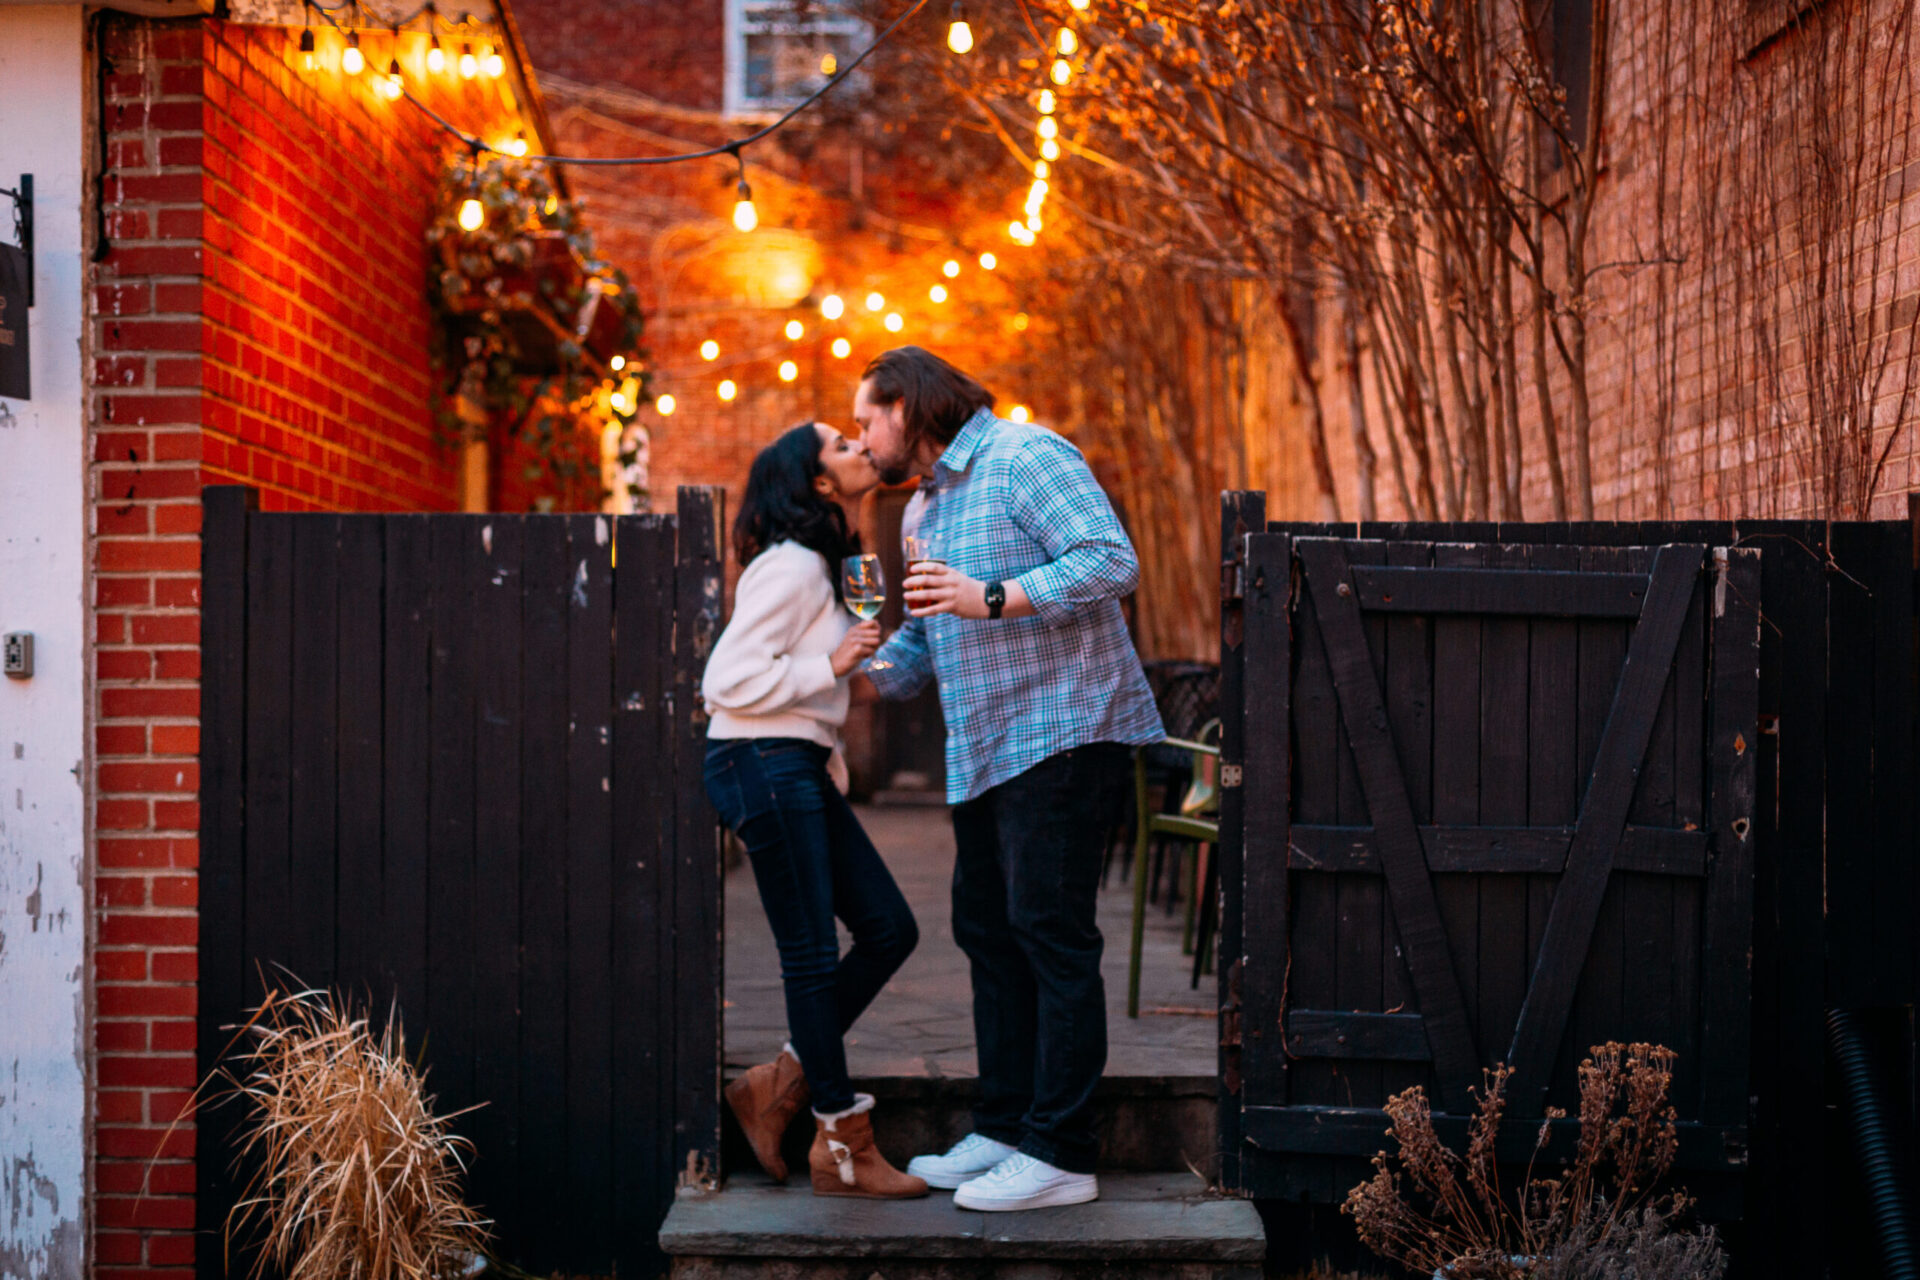 couple kissing with soft background lights in downtown scene